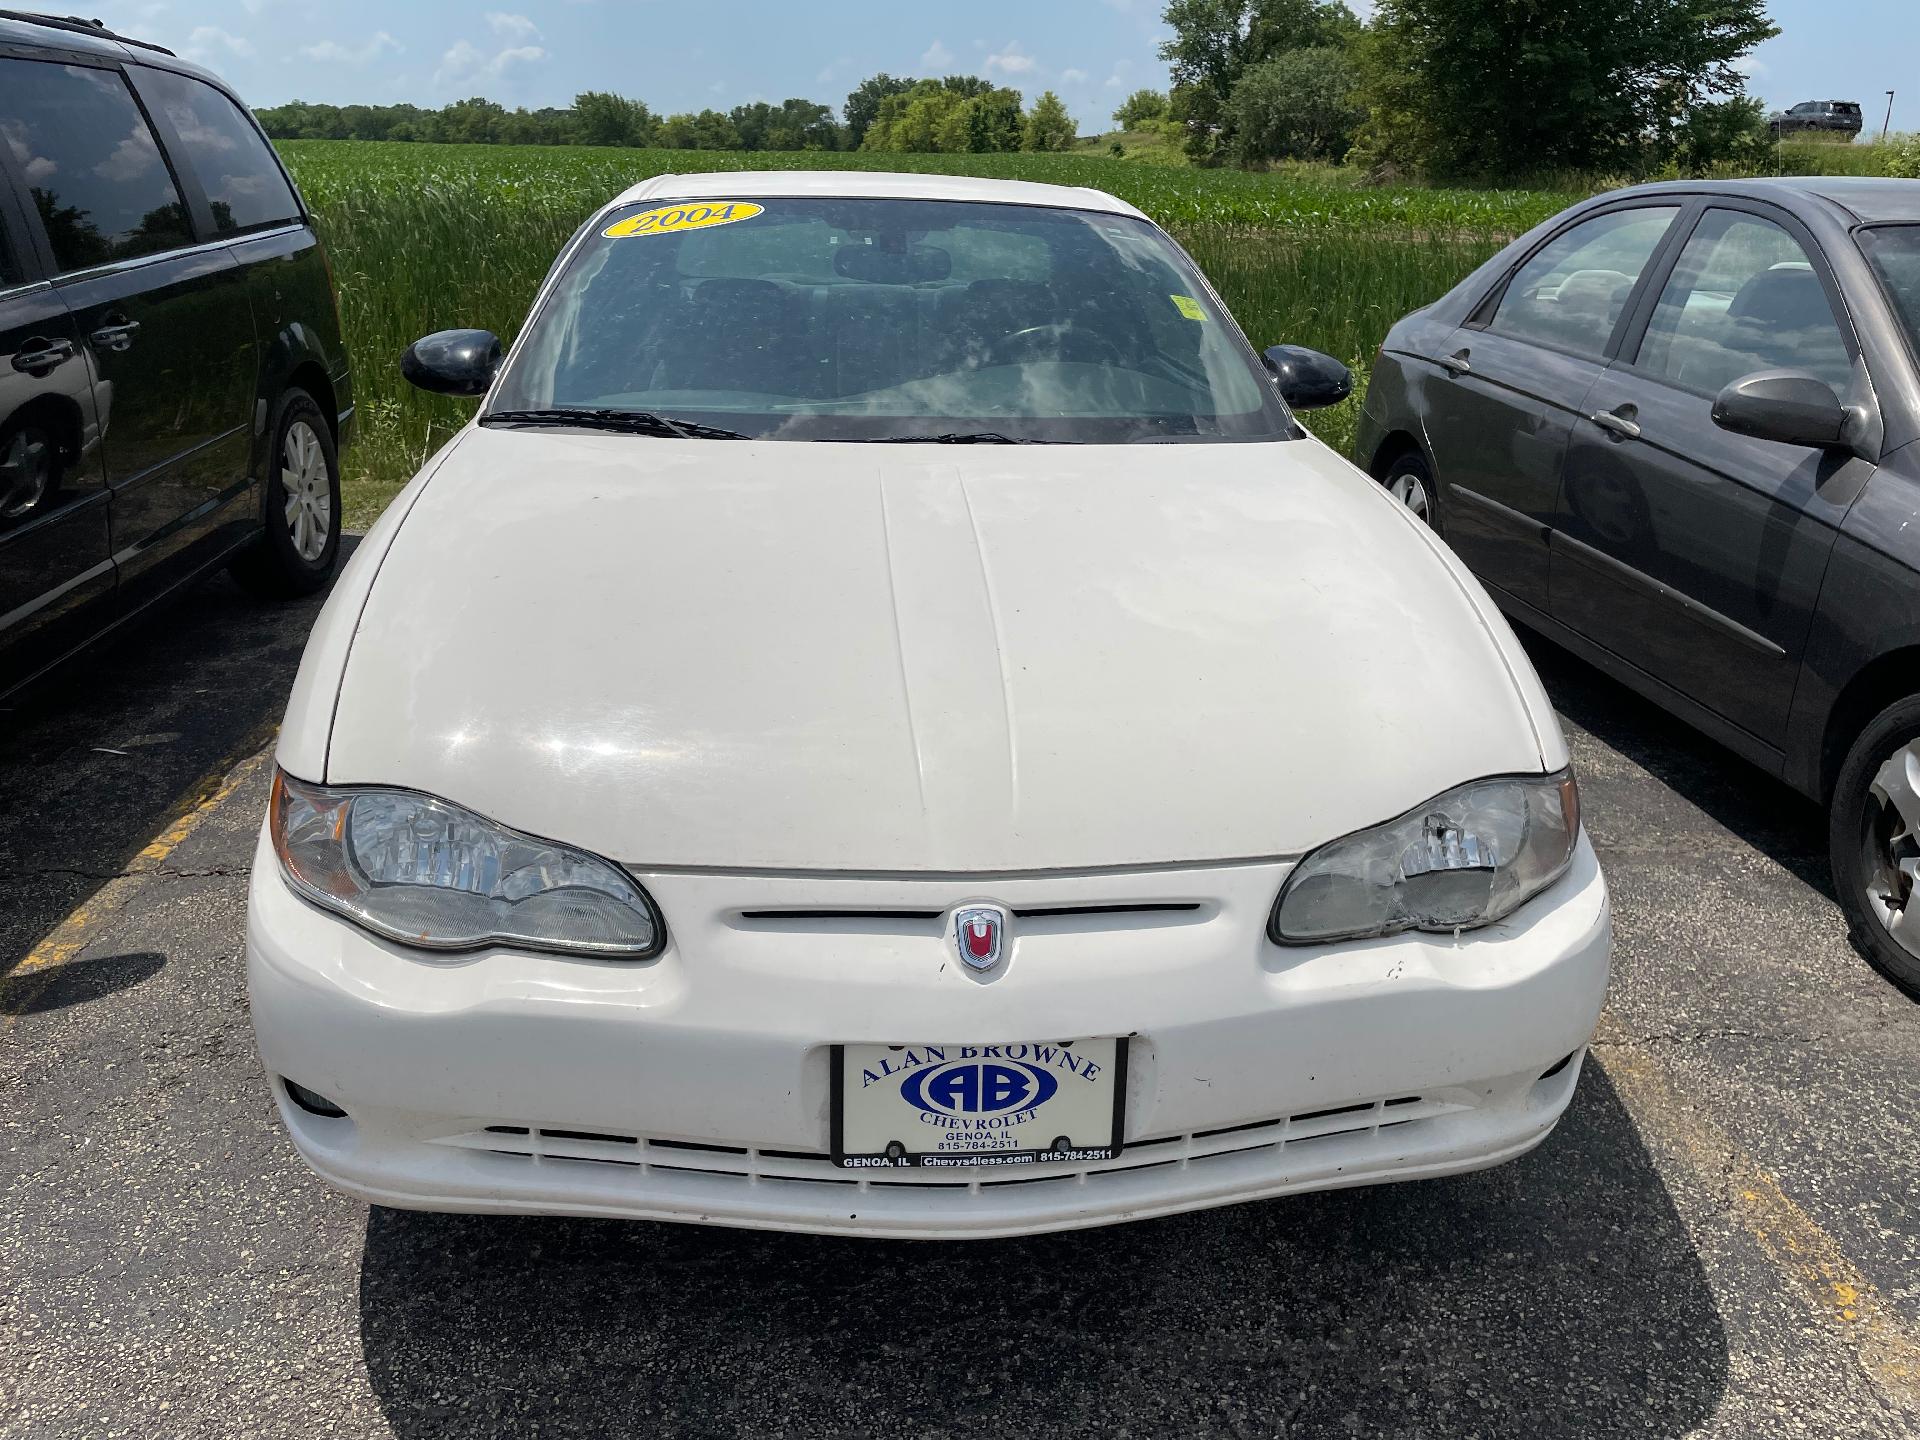 Used 2004 Chevrolet Monte Carlo SS with VIN 2G1WX12K749374359 for sale in Genoa, IL